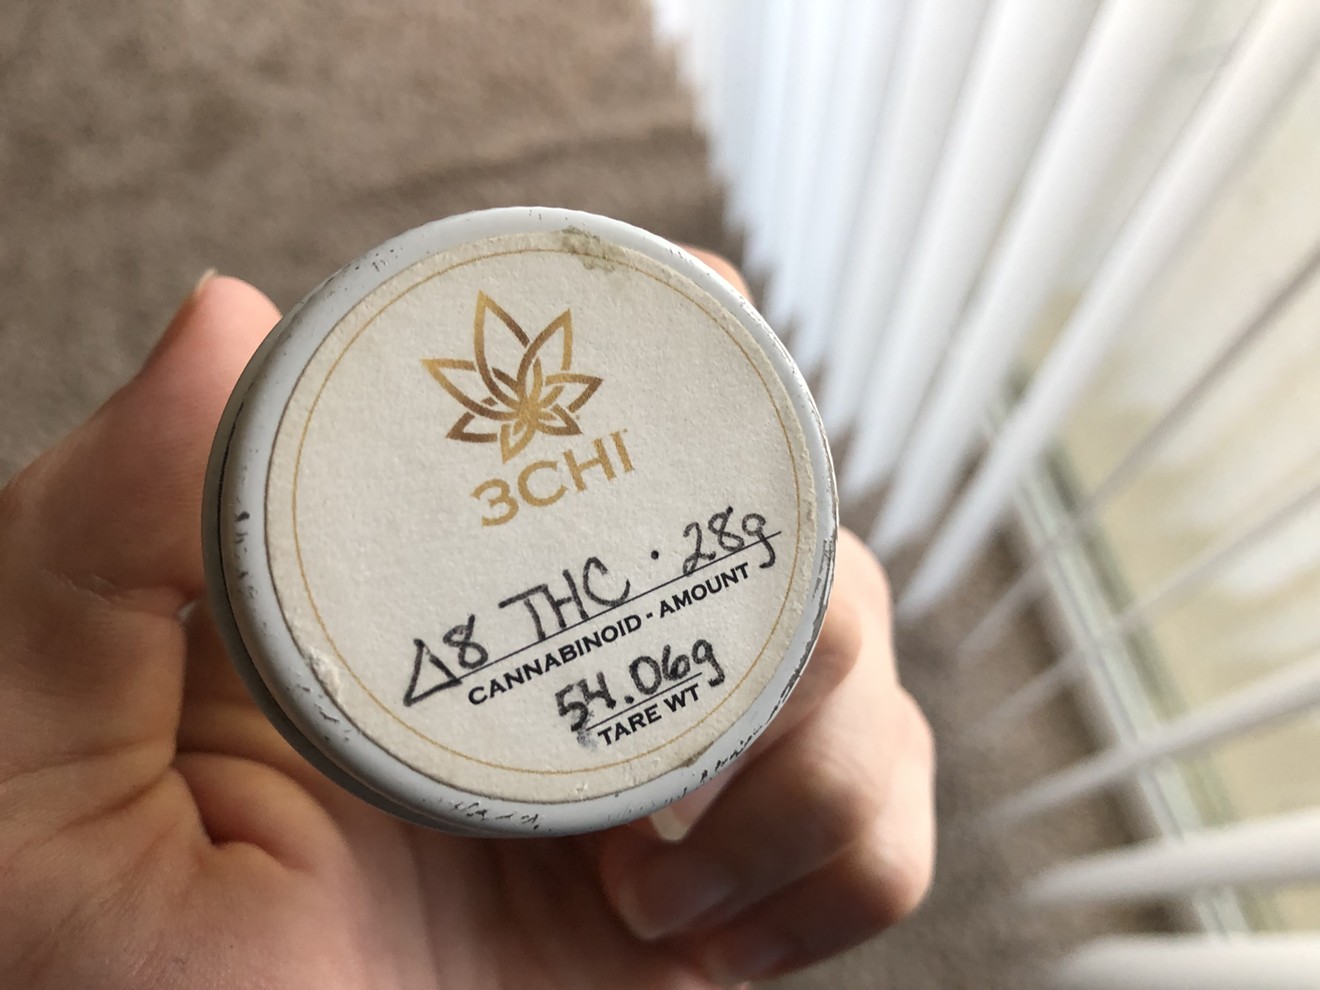 This container holds 28 grams of delta-8 THC distillate.